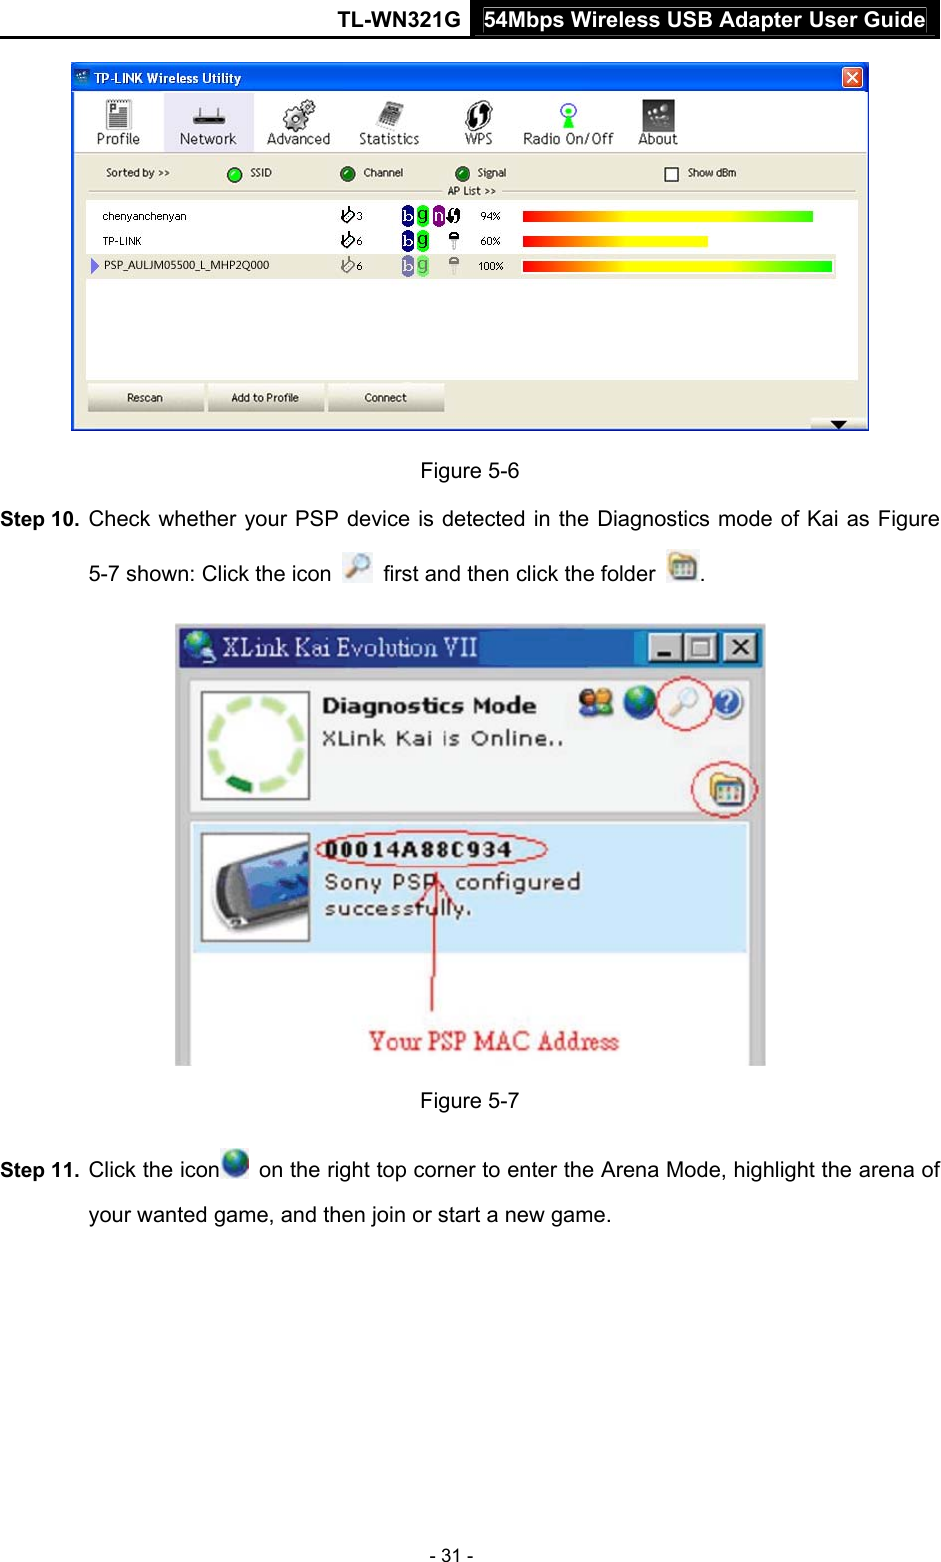 54Mbps Wireless USB Adapter User GuideTL-WN321G - 31 -  Figure 5-6 Step 10.  Check whether your PSP device is detected in the Diagnostics mode of Kai as Figure 5-7 shown: Click the icon    first and then click the folder  .  Figure 5-7 Step 11.  Click the icon   on the right top corner to enter the Arena Mode, highlight the arena of your wanted game, and then join or start a new game. 